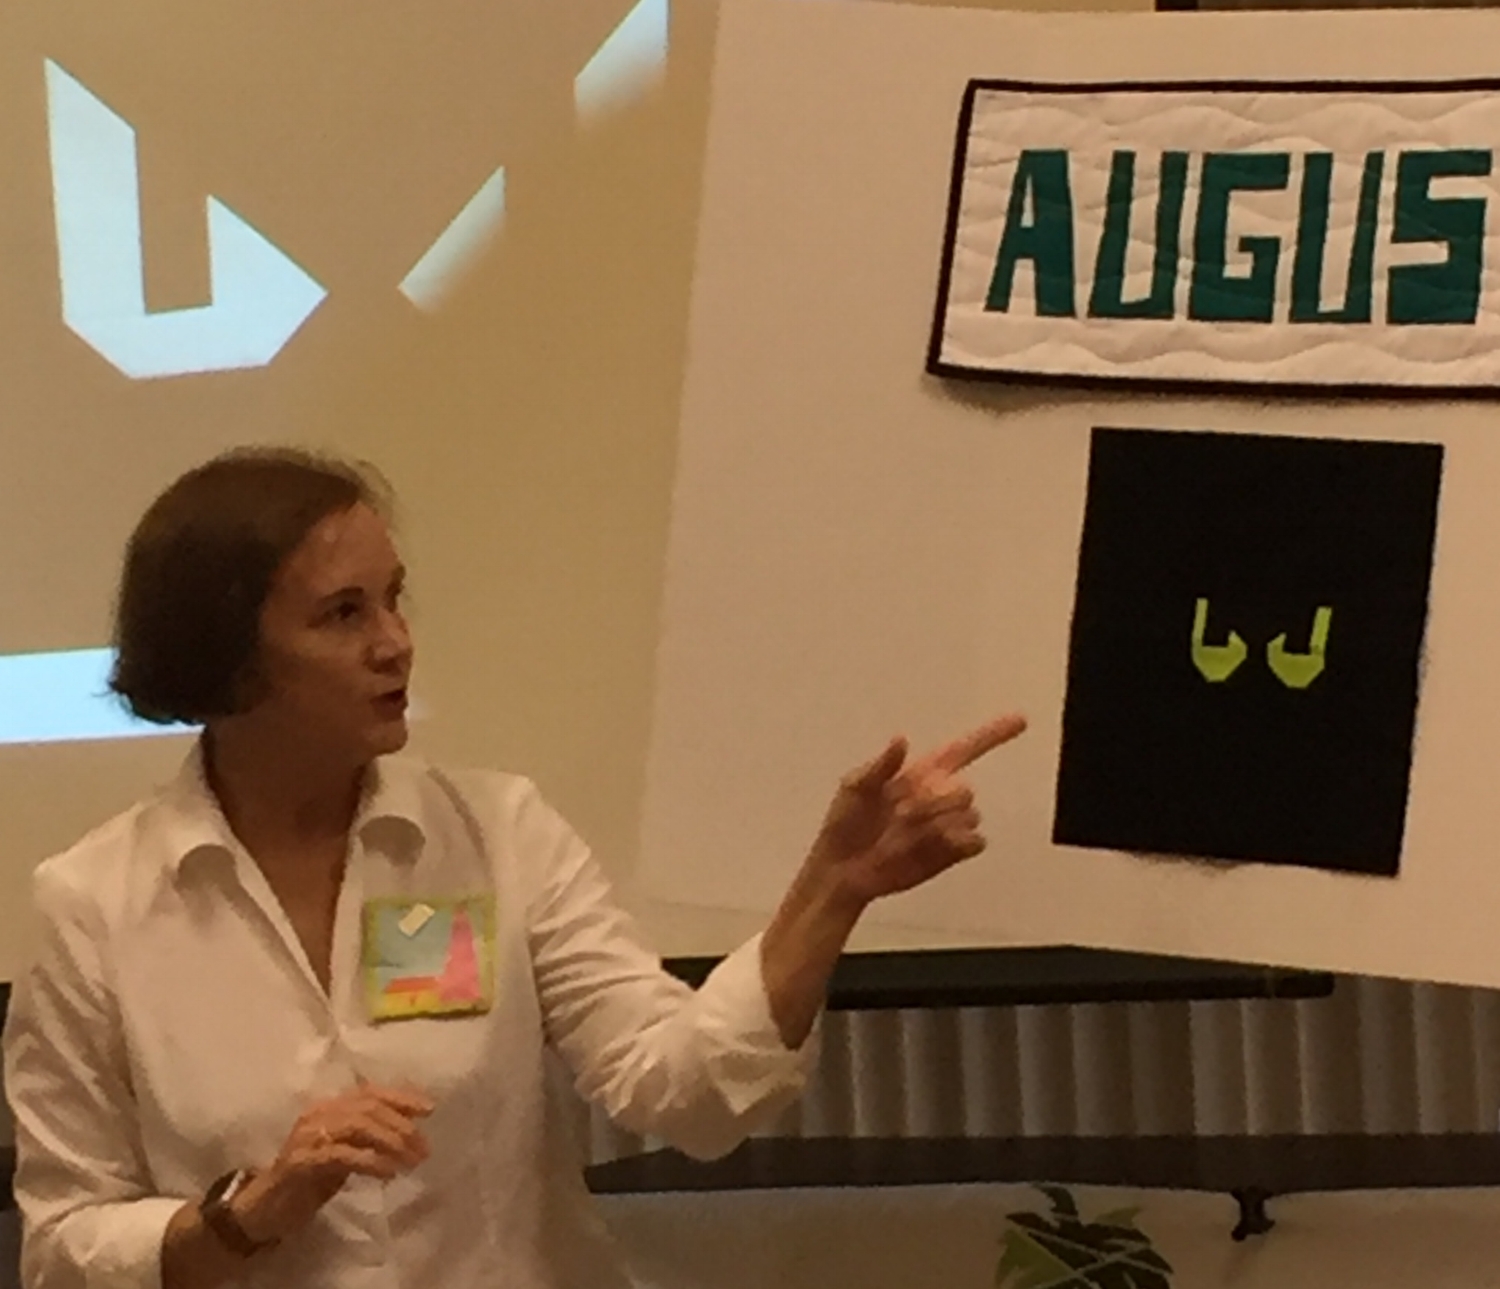 Linda reviewed the scary August BOM to be brought to the September meeting.